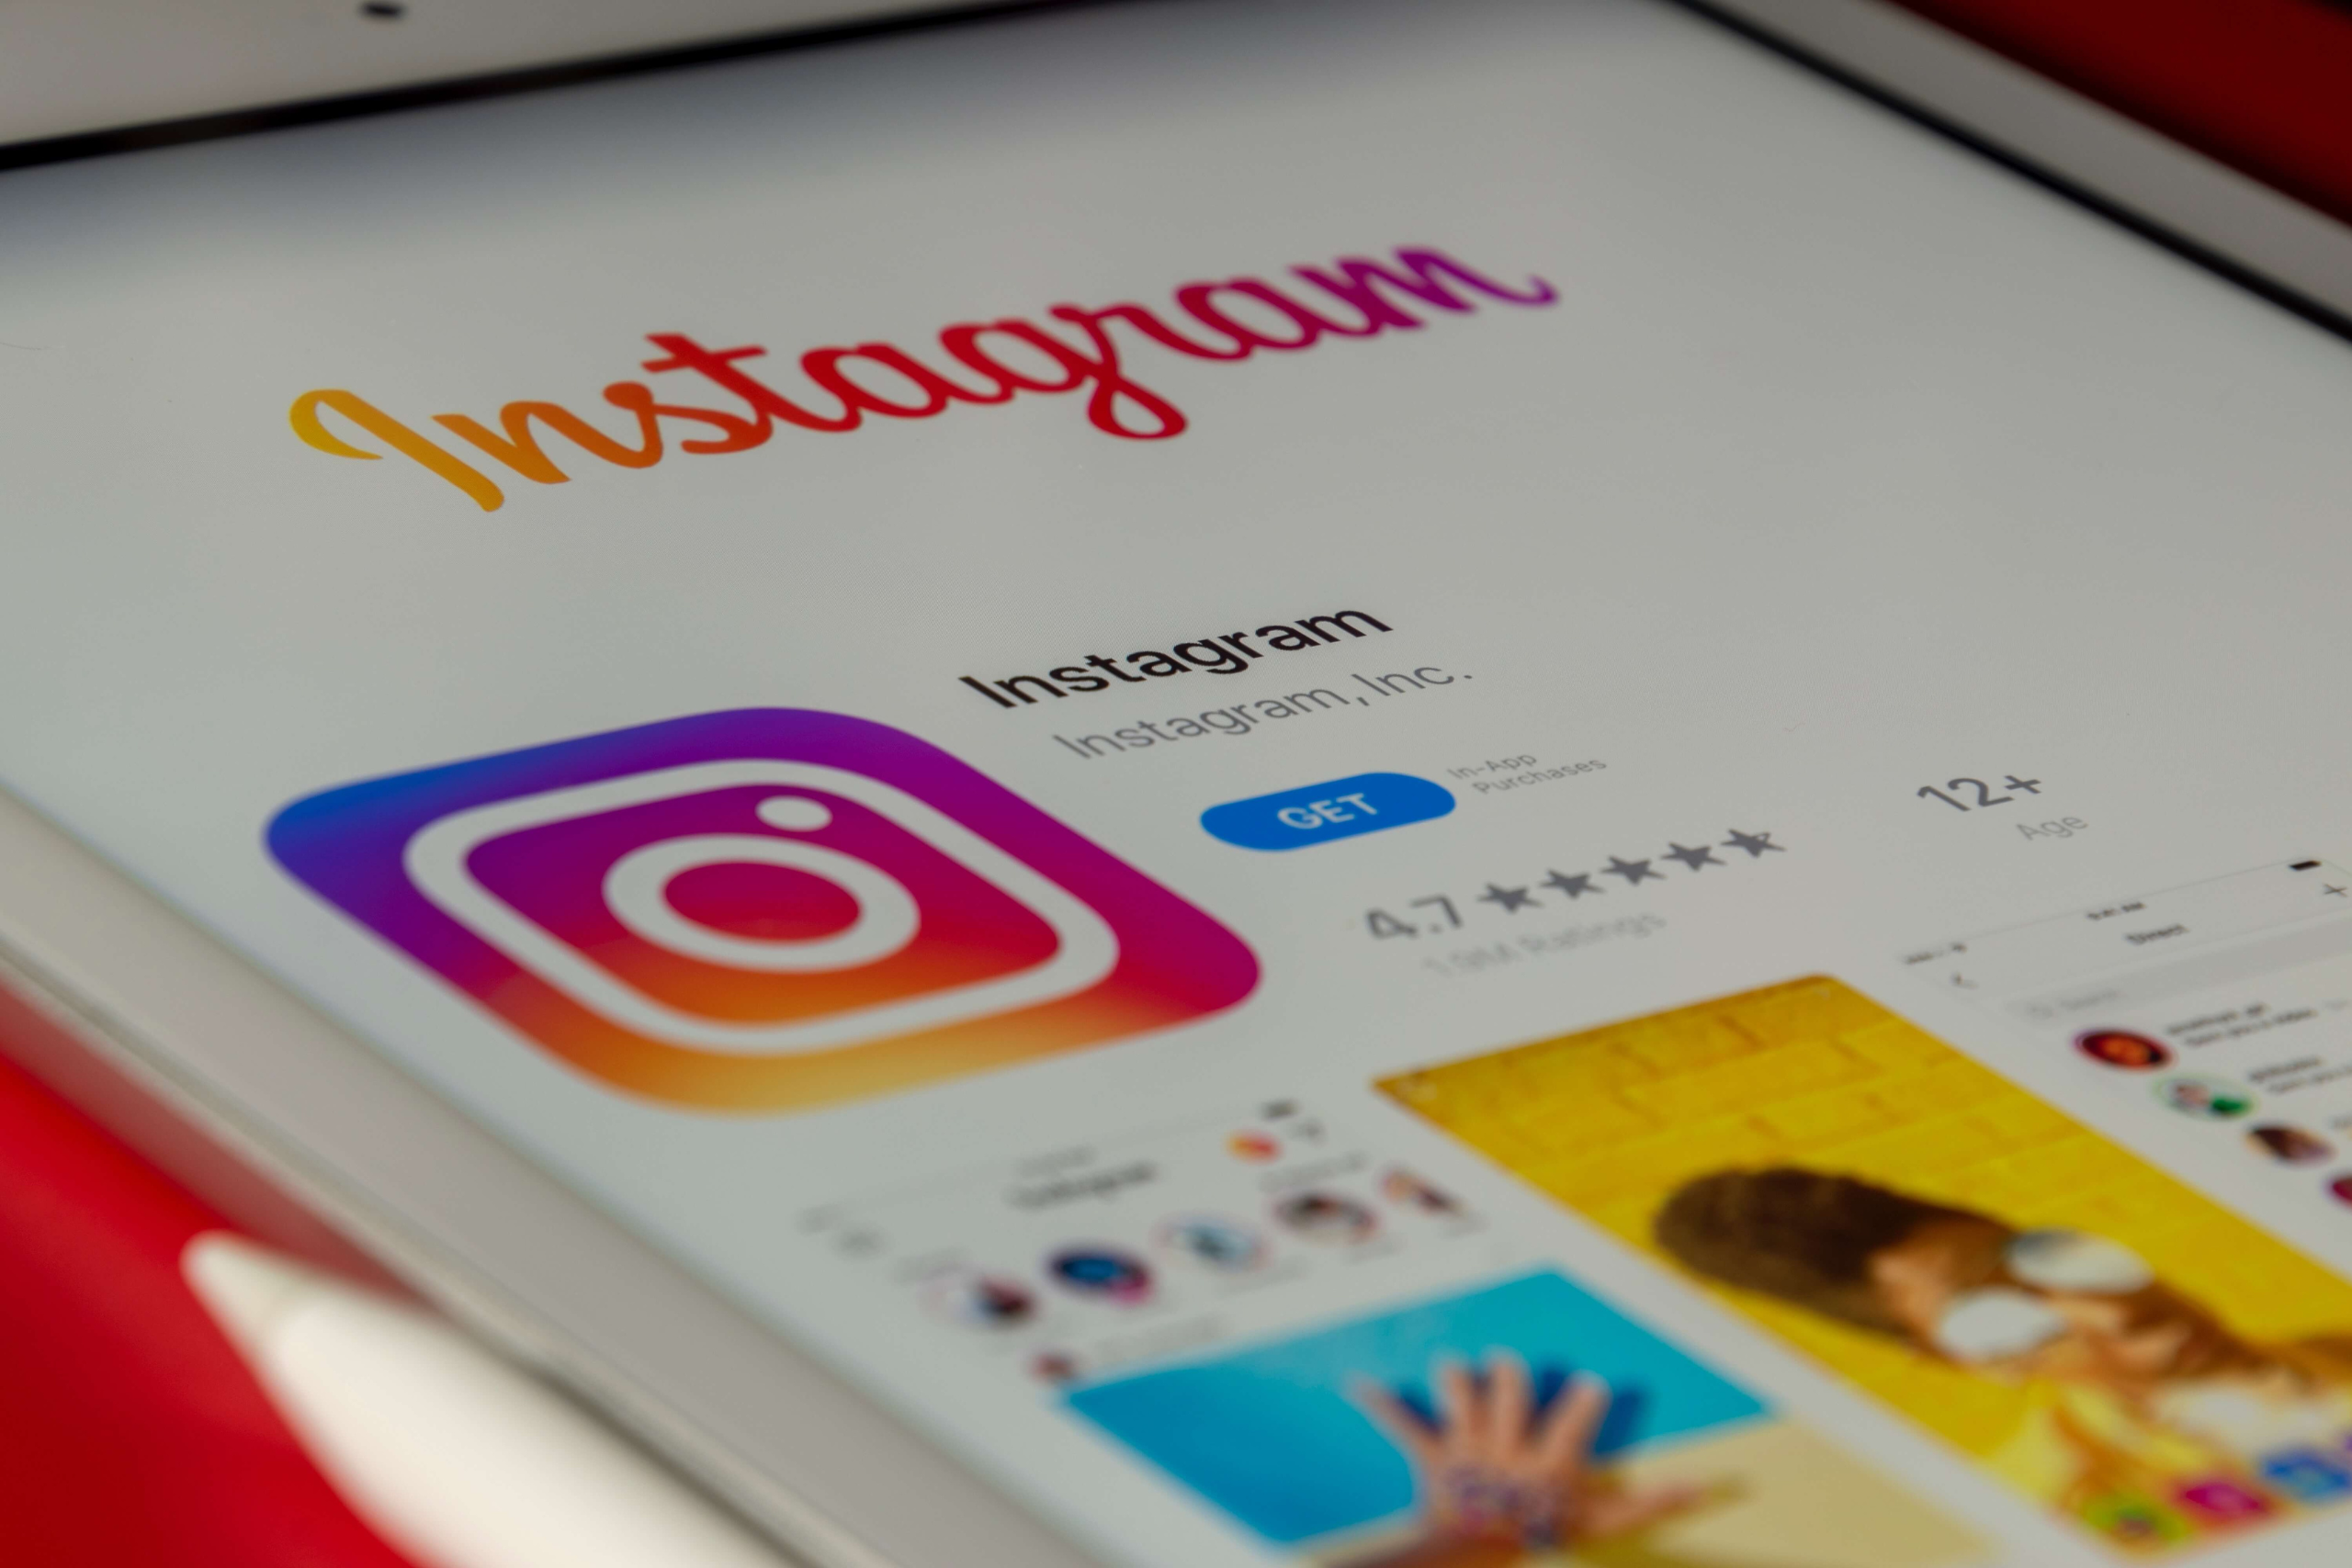 Image of the Instagram logo, a platform used by our digital marketing experts in Essex